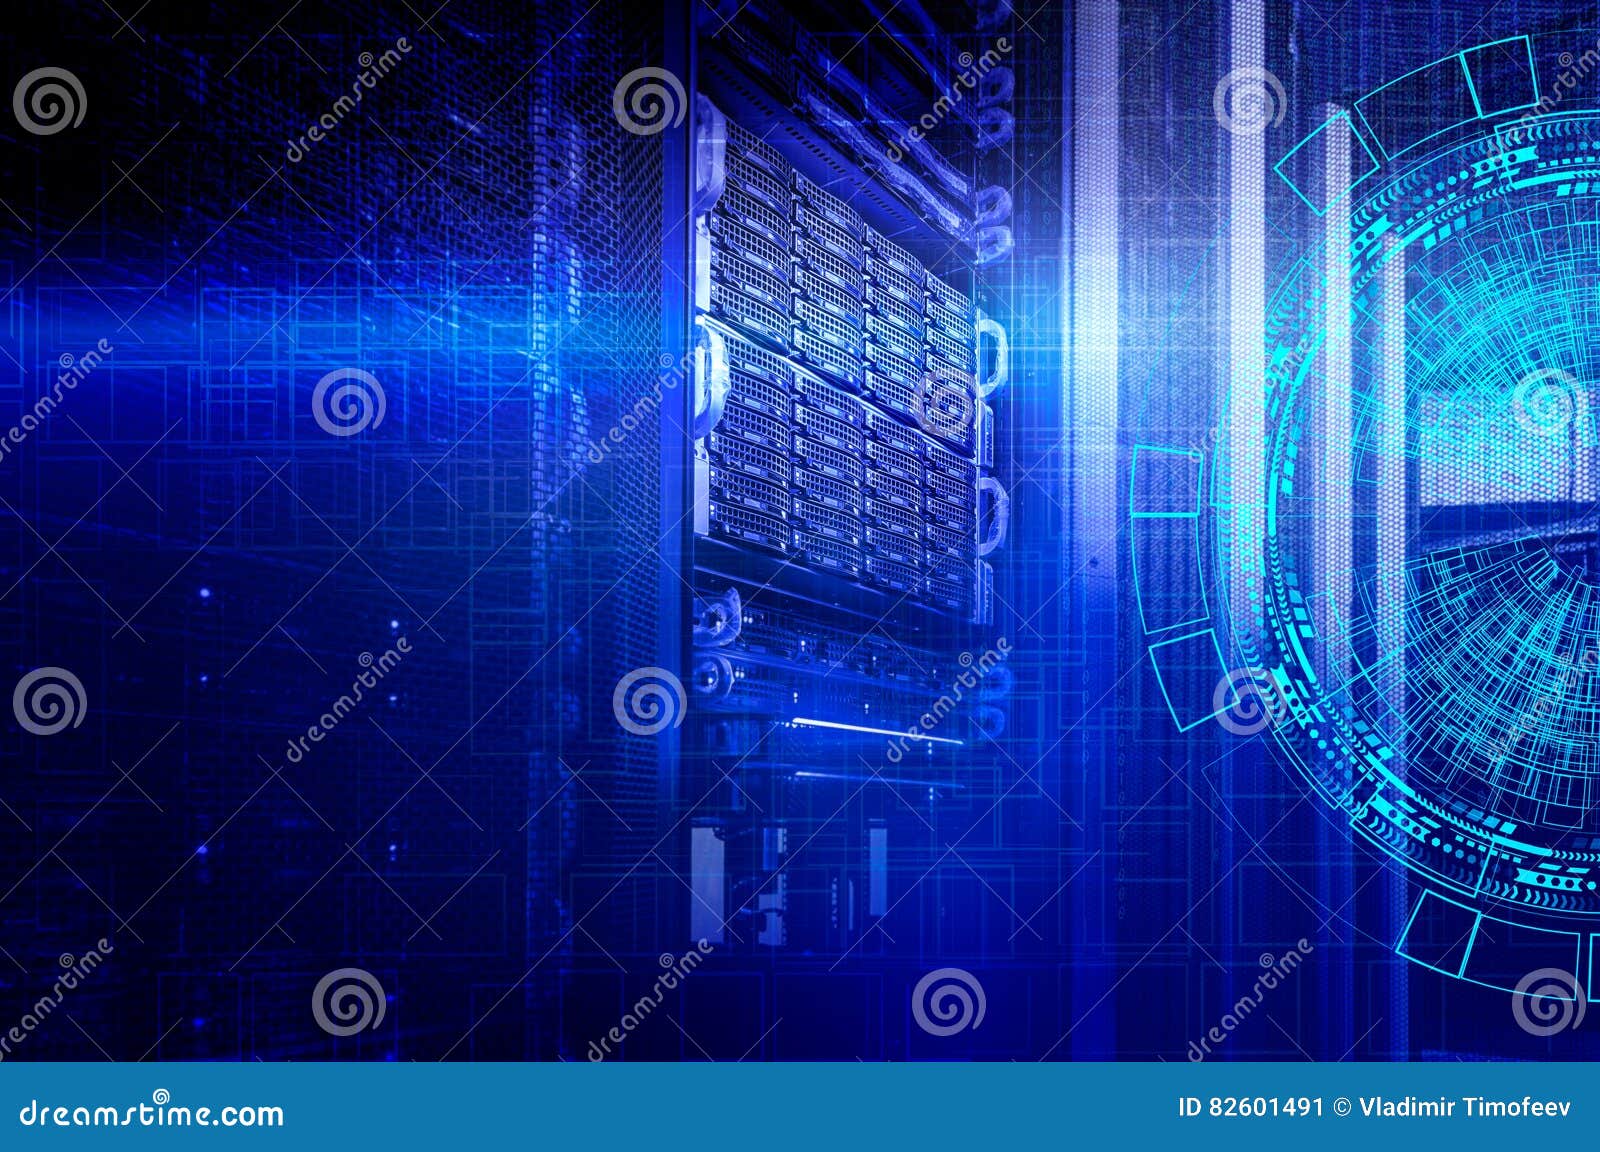 concept of disk storage data center. information technology and database on technological background